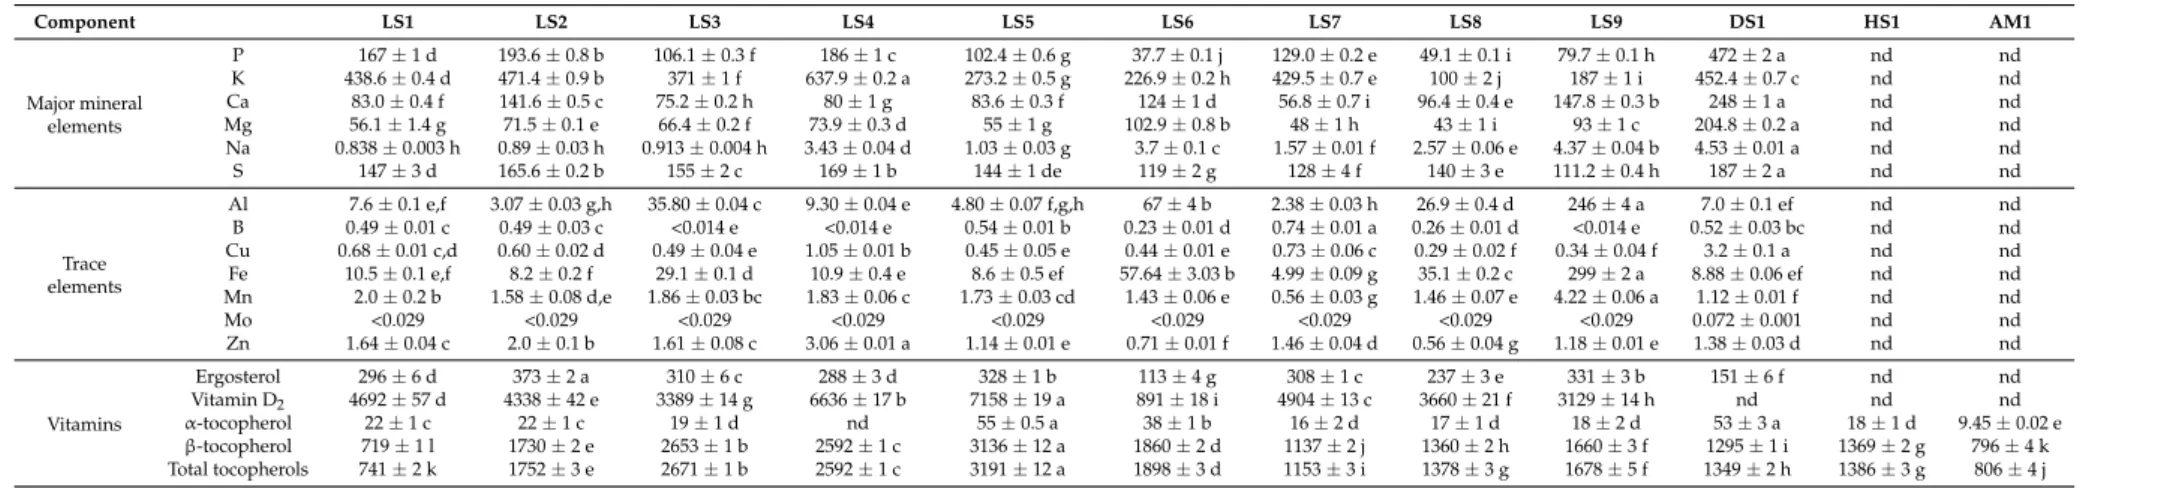 Table 4. Mineral Composition (major &amp; trace) (mg/100 g · dw), ergosterol (mg/100 g · dw), vitamin D 2 (IU/100 g · dw) and tocopherol (µg/100 g · dw) contents of studied edible mushrooms